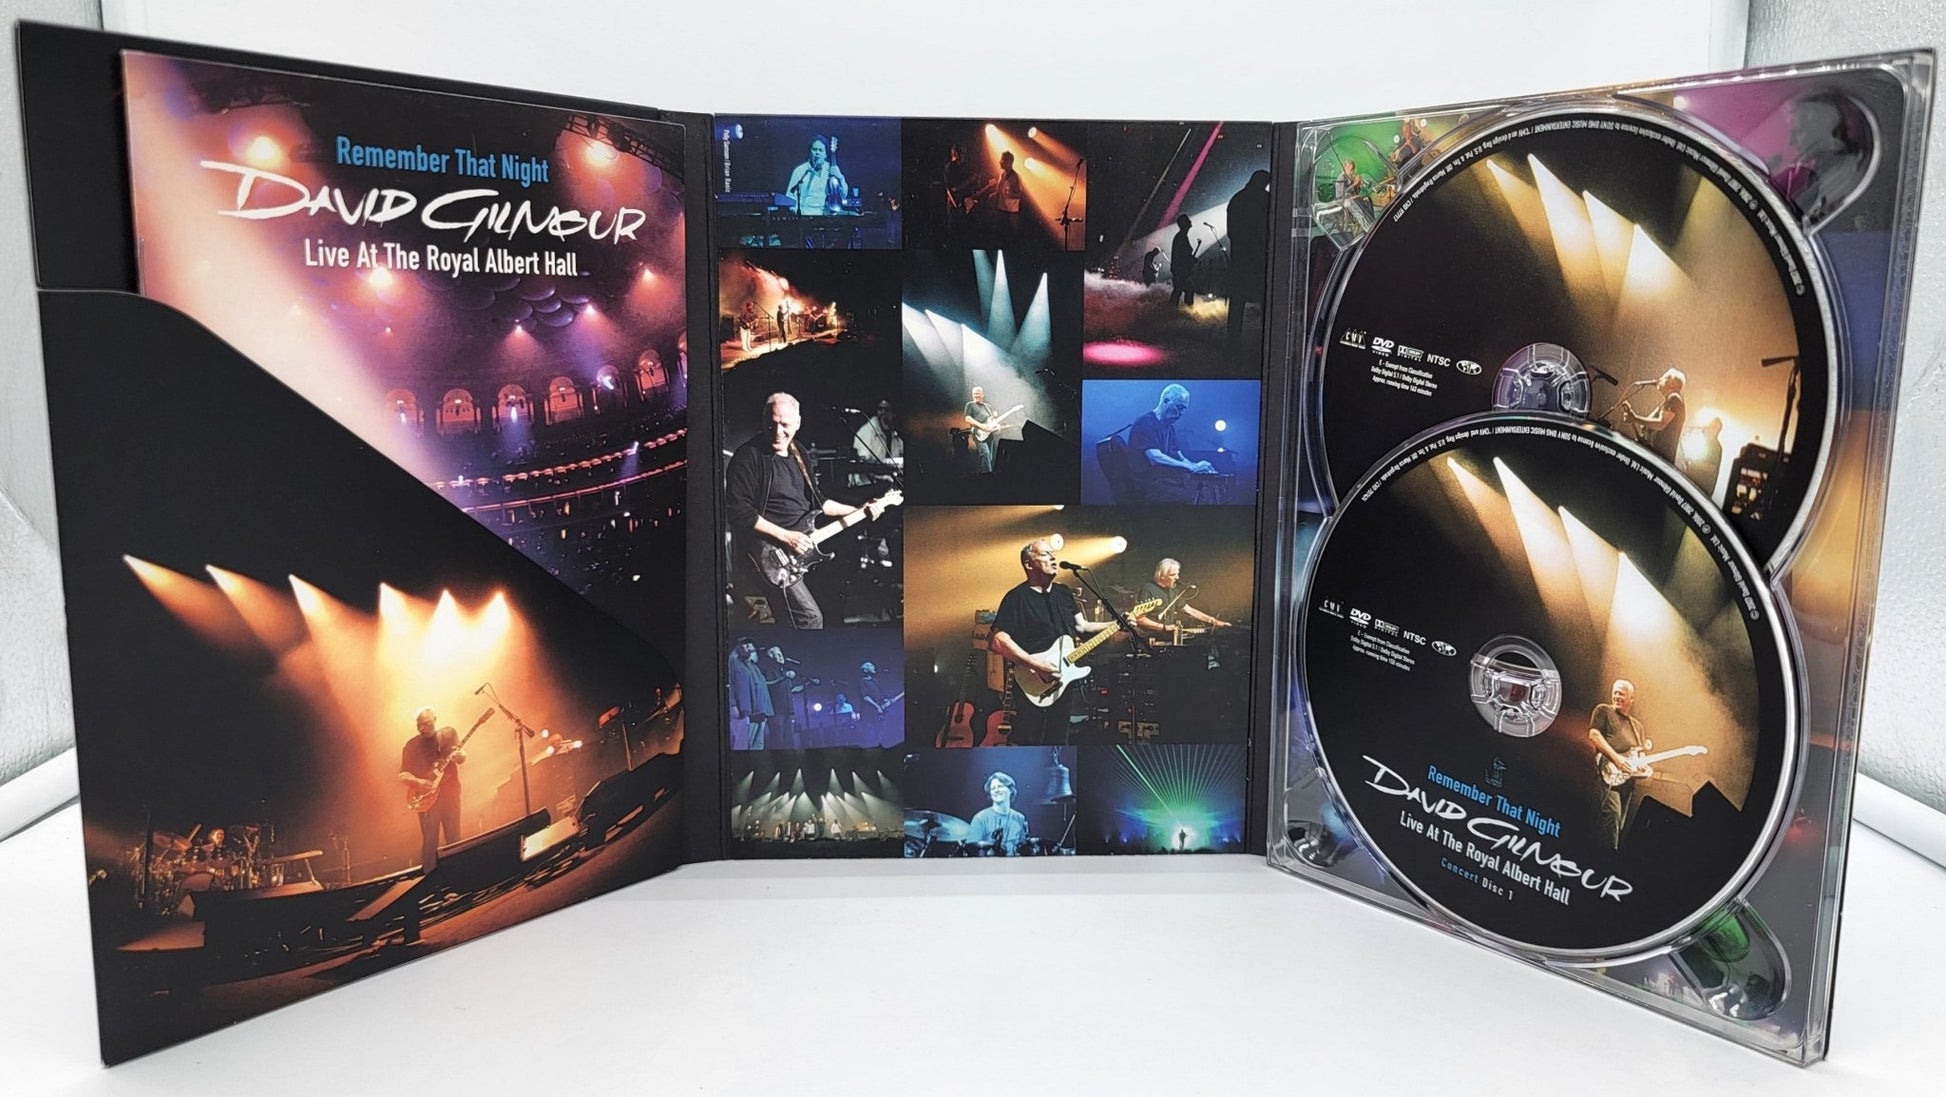 Steady Bunny Shop - David Gilmour - Remember That Night | DVD | Live at the Royal Albert Hall -2 Disc set - DVD - Steady Bunny Shop